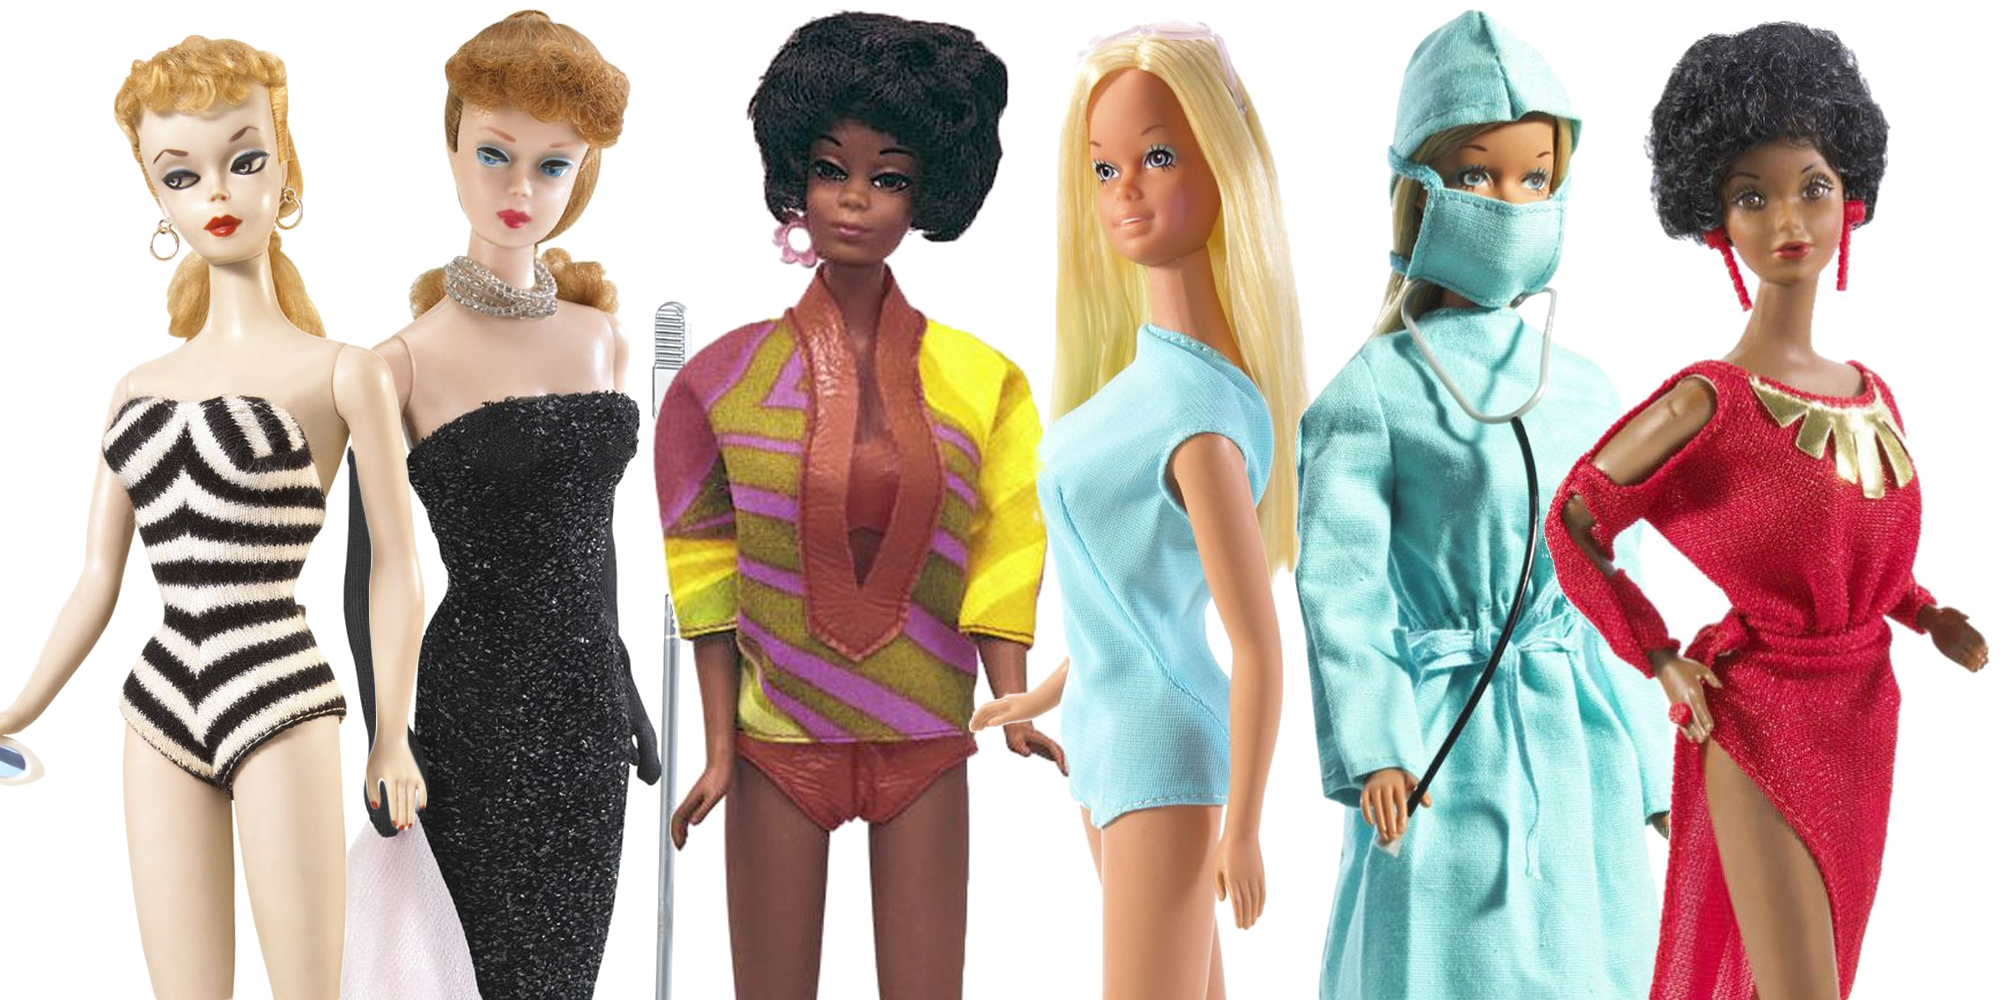 Buy Barbie Dresses for Women and Unleash Your Inner Doll